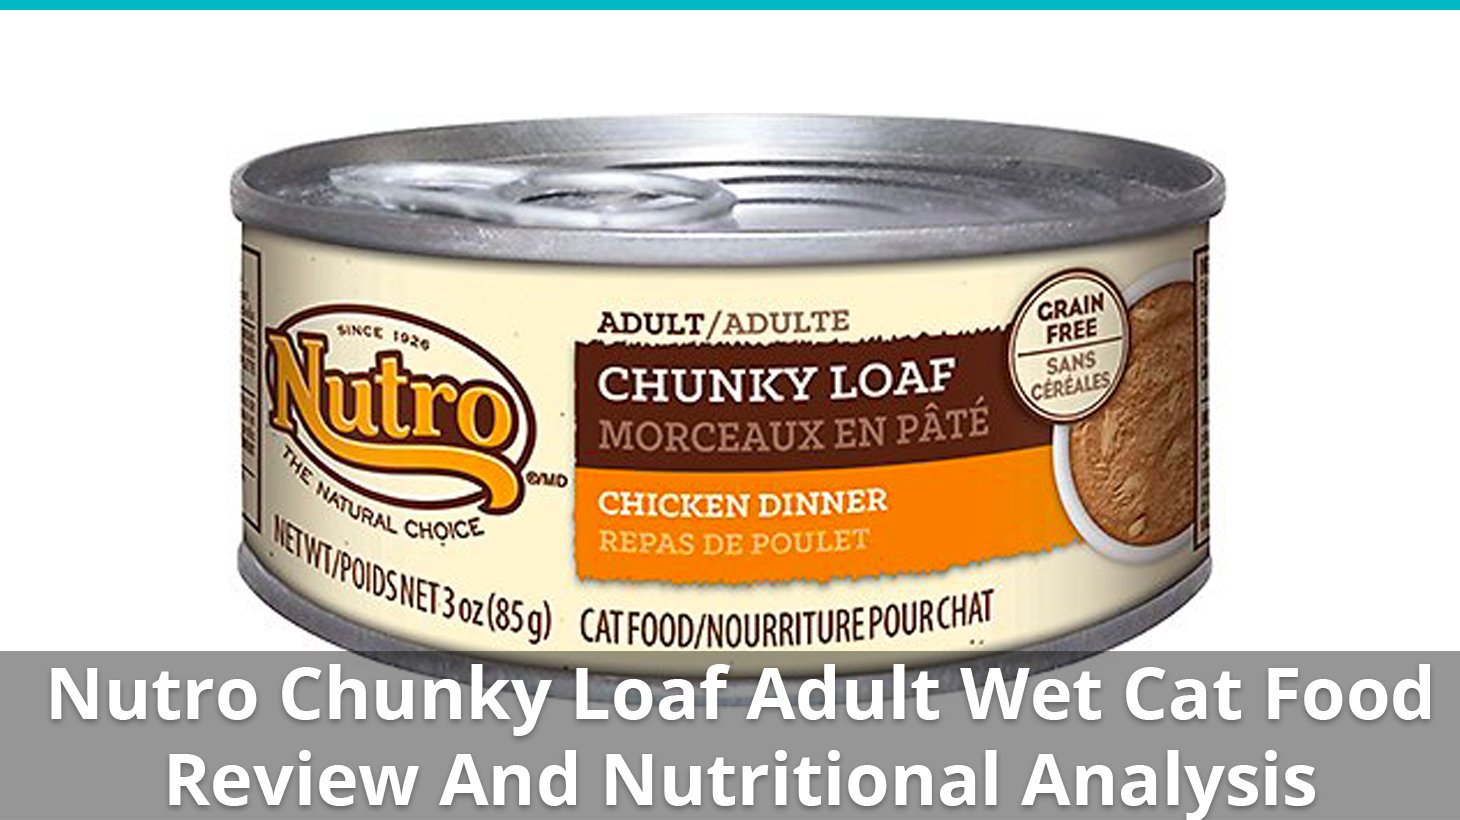 Nutro Chunky Loaf Adult Cat Food (Wet) Review And Nutrition Analysis